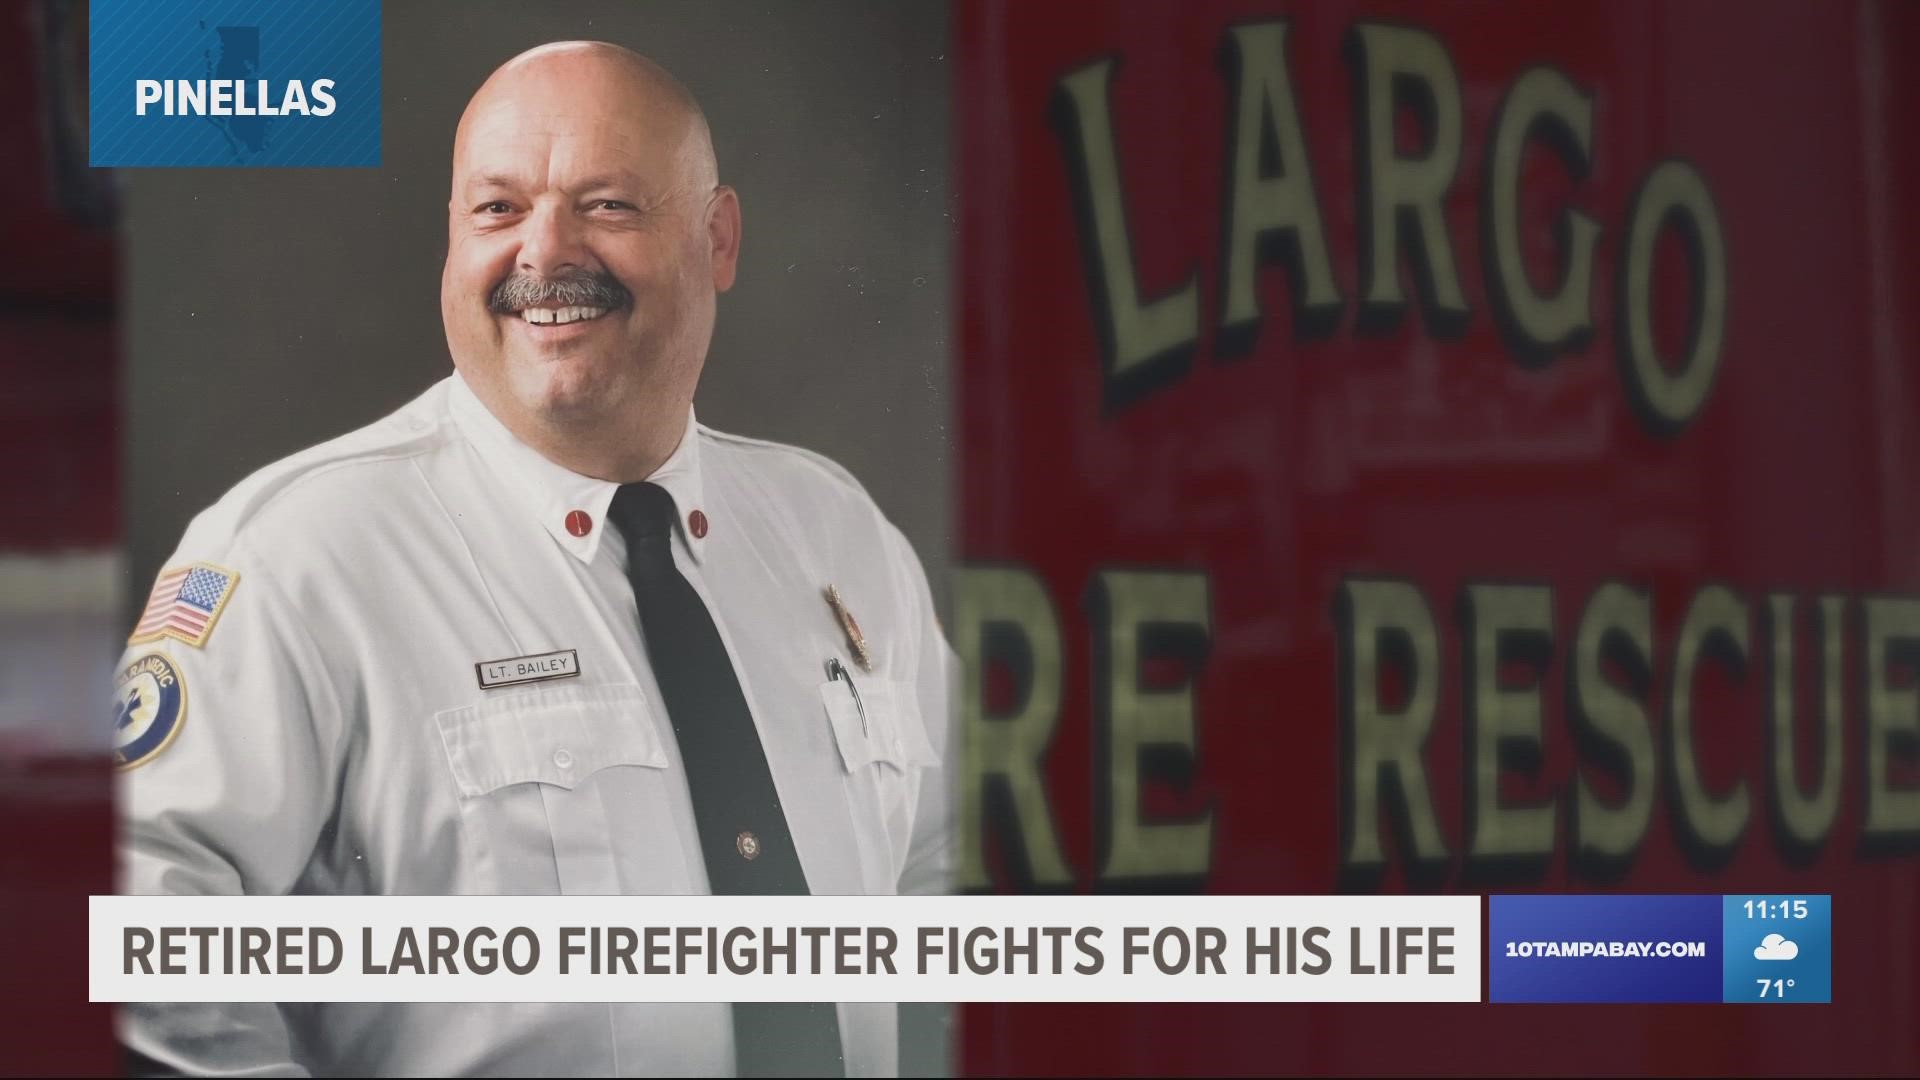 Phillip Bailey served the Pinellas County area for about 30 years as a firefighter.